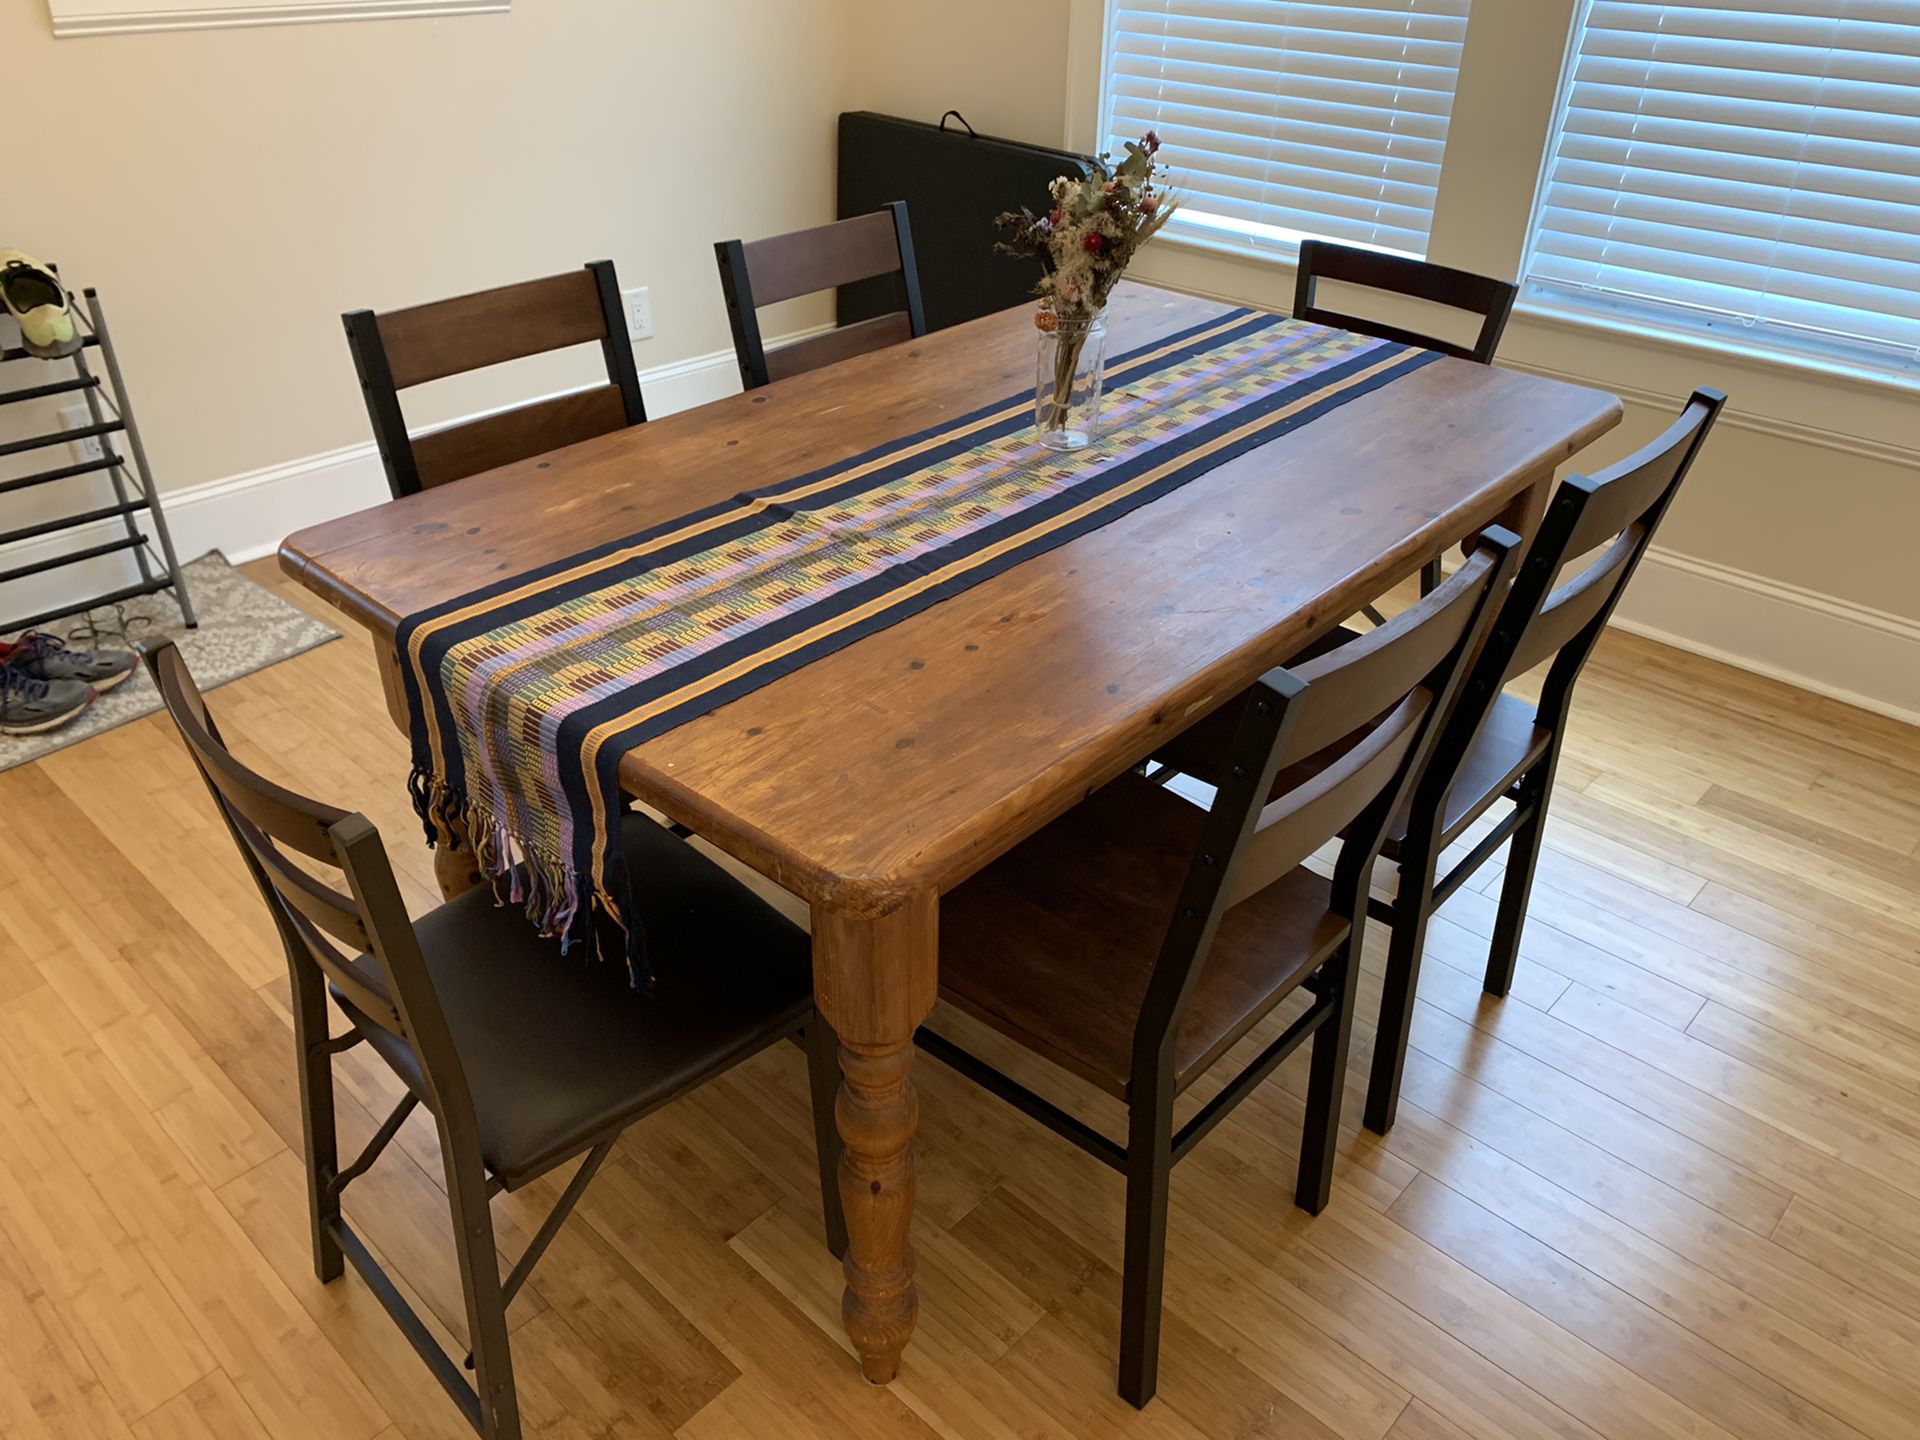 Wooden Dining Room Table, 4 chairs